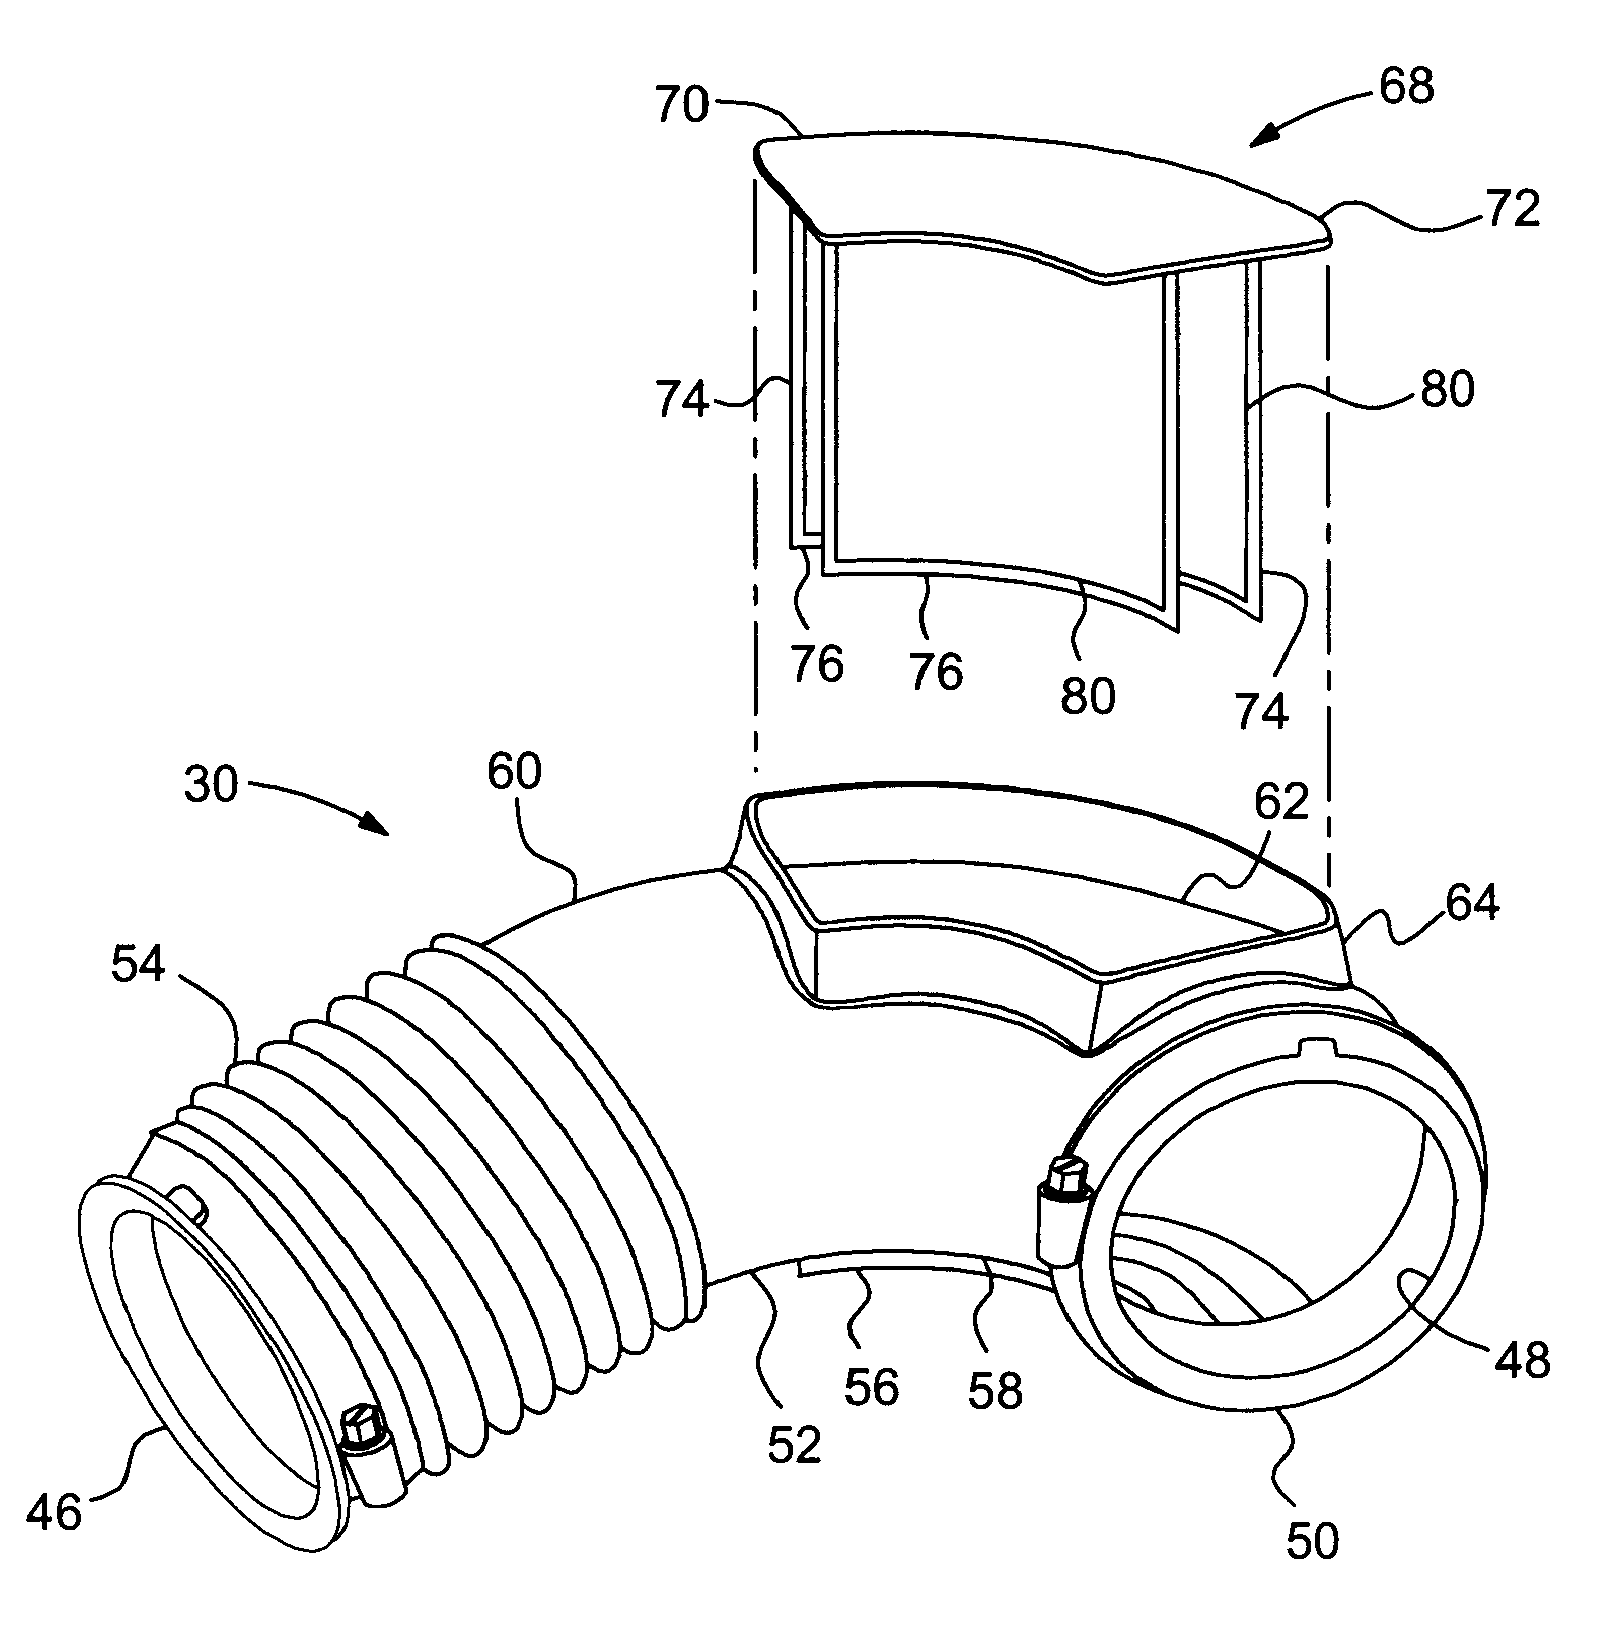 Flow turning vane assembly with integrated hydrocarbon adsorbent